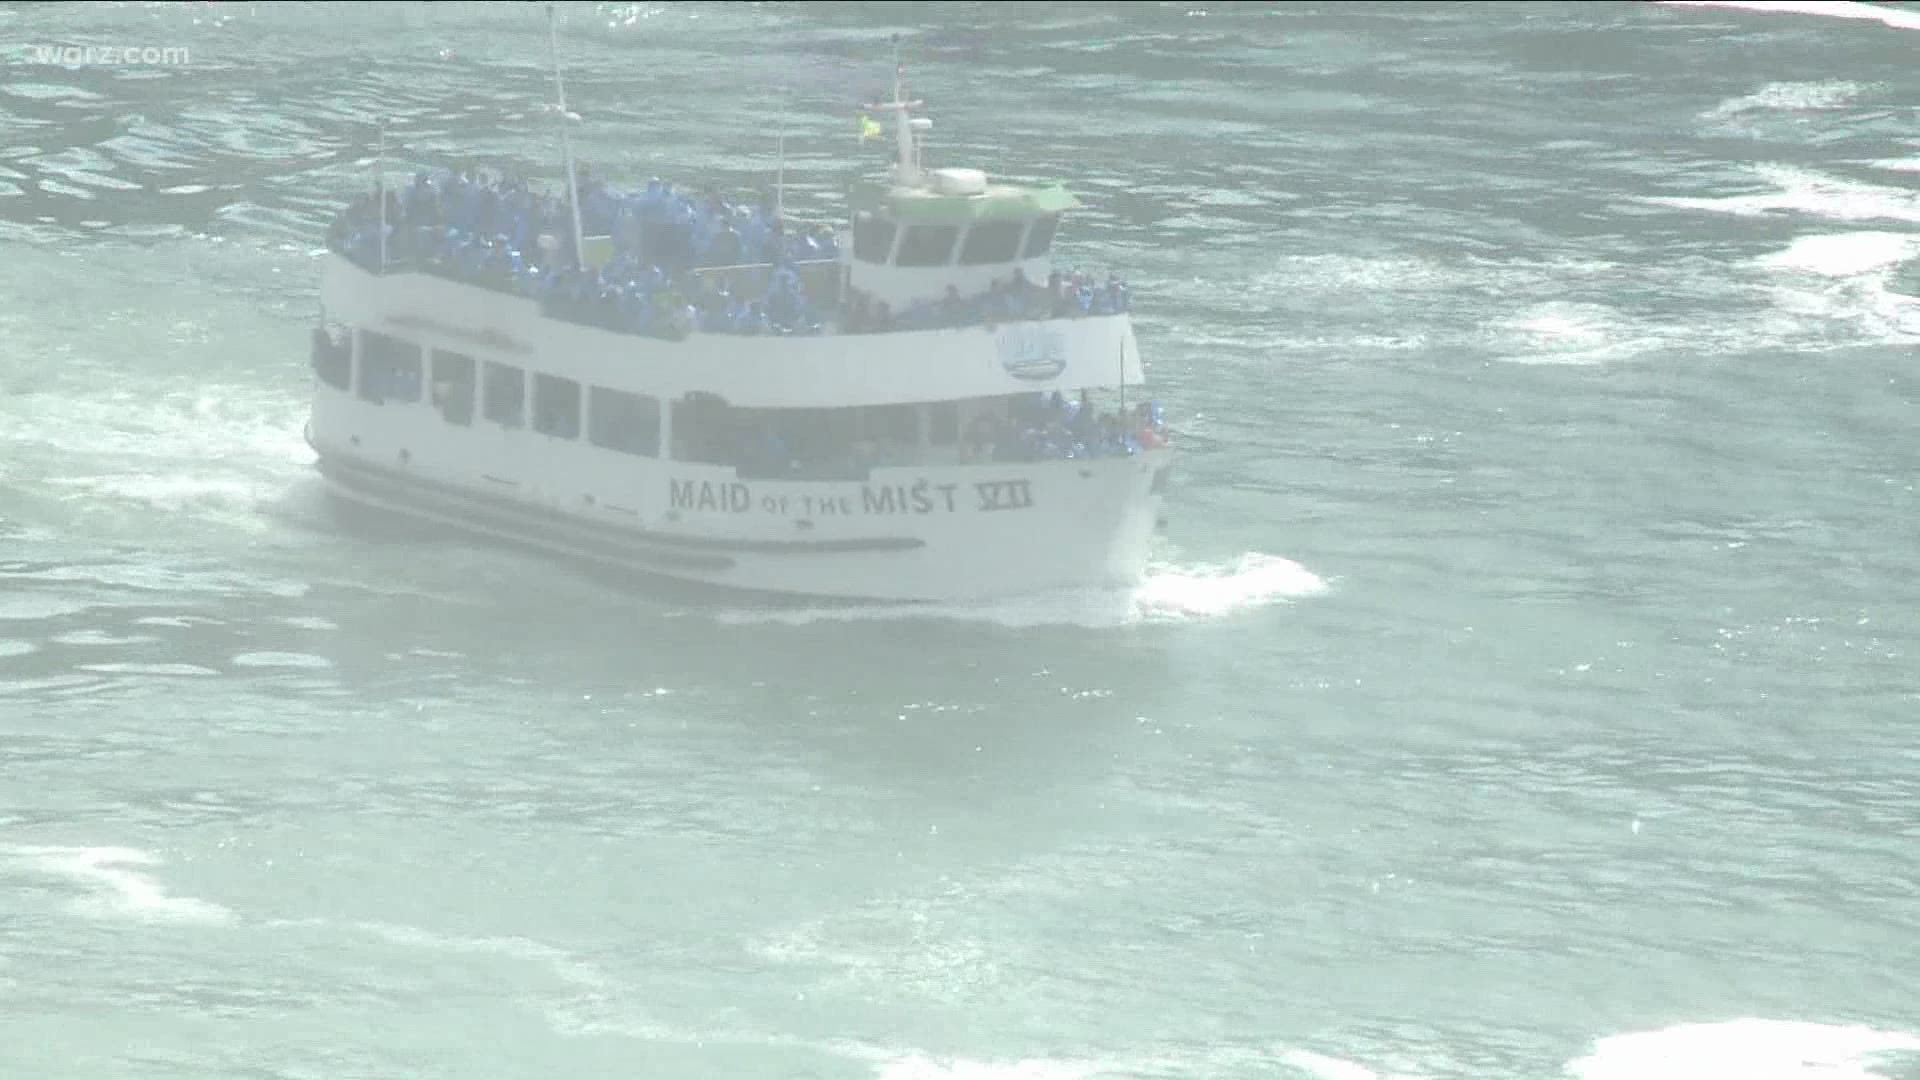 Maid of the Mist seeing crowding tourists